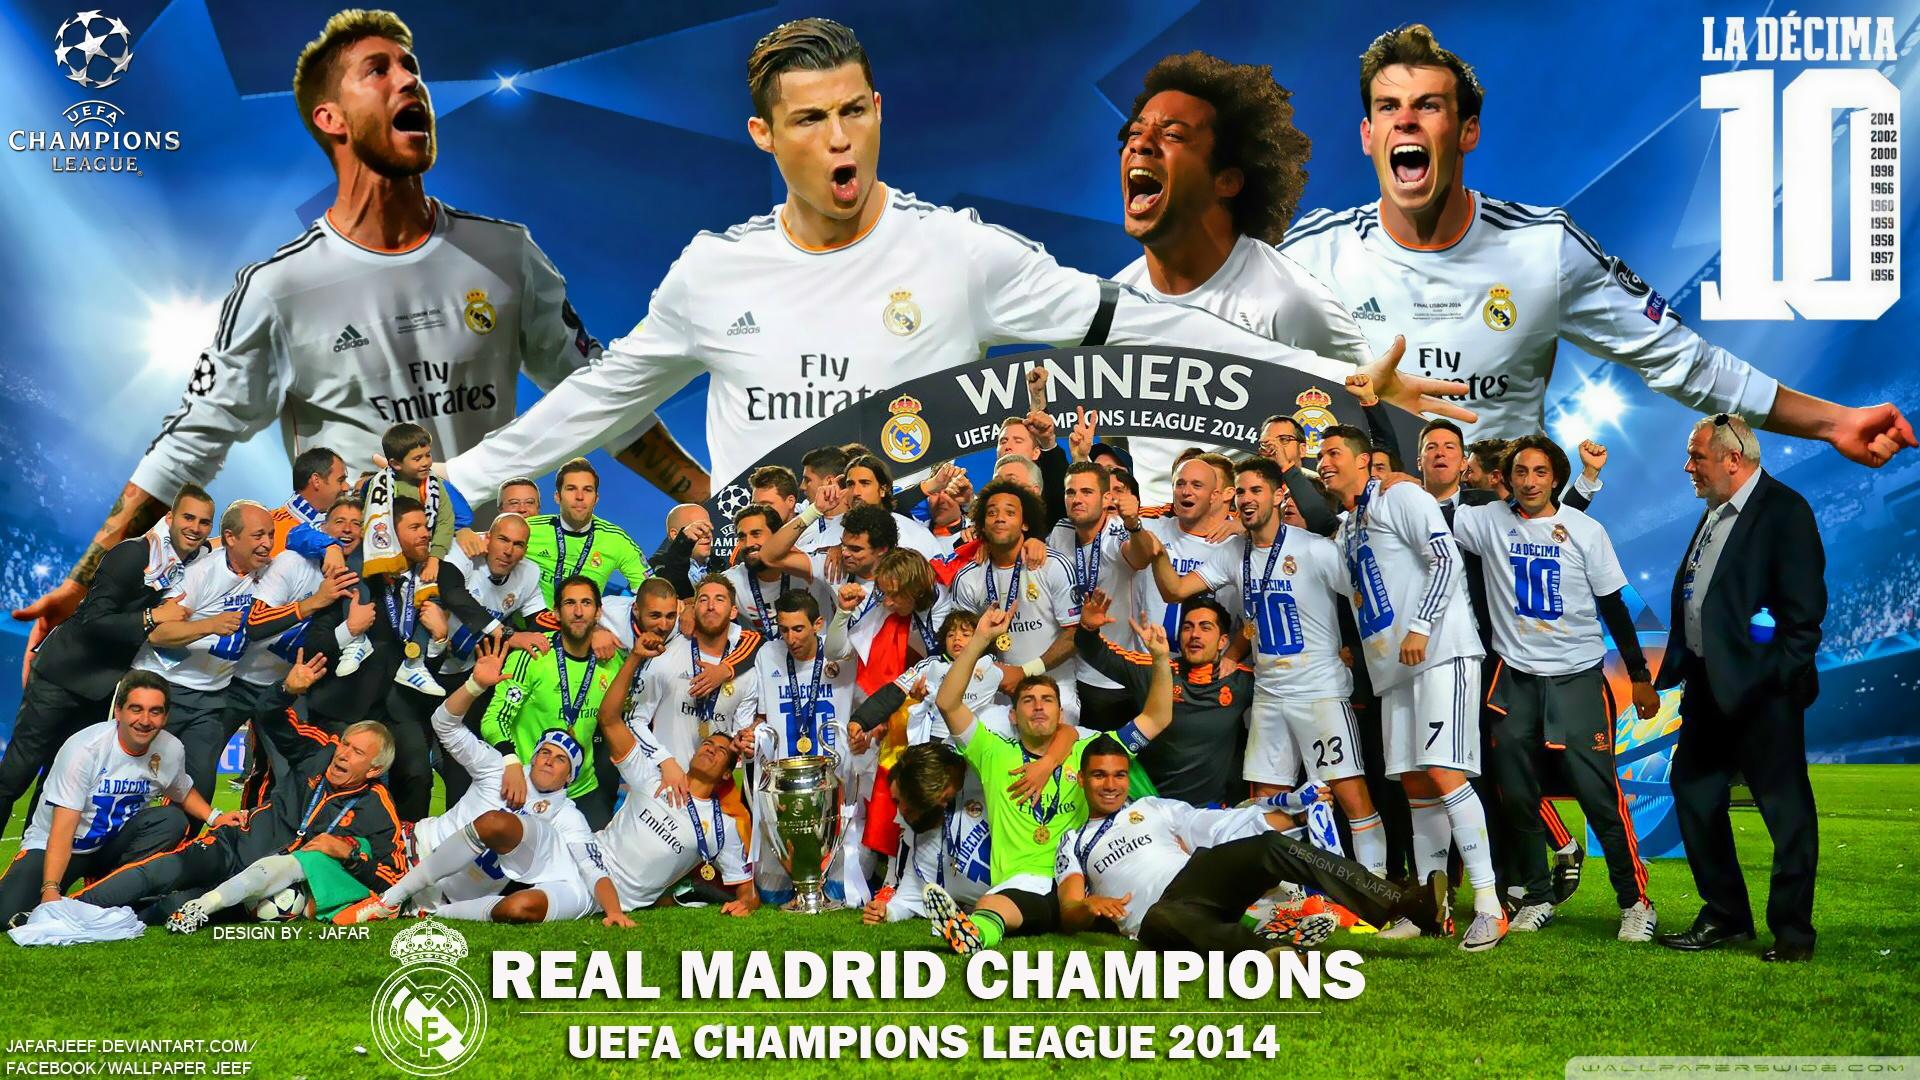 Free download New Real Madrid Winners Champions League 2014